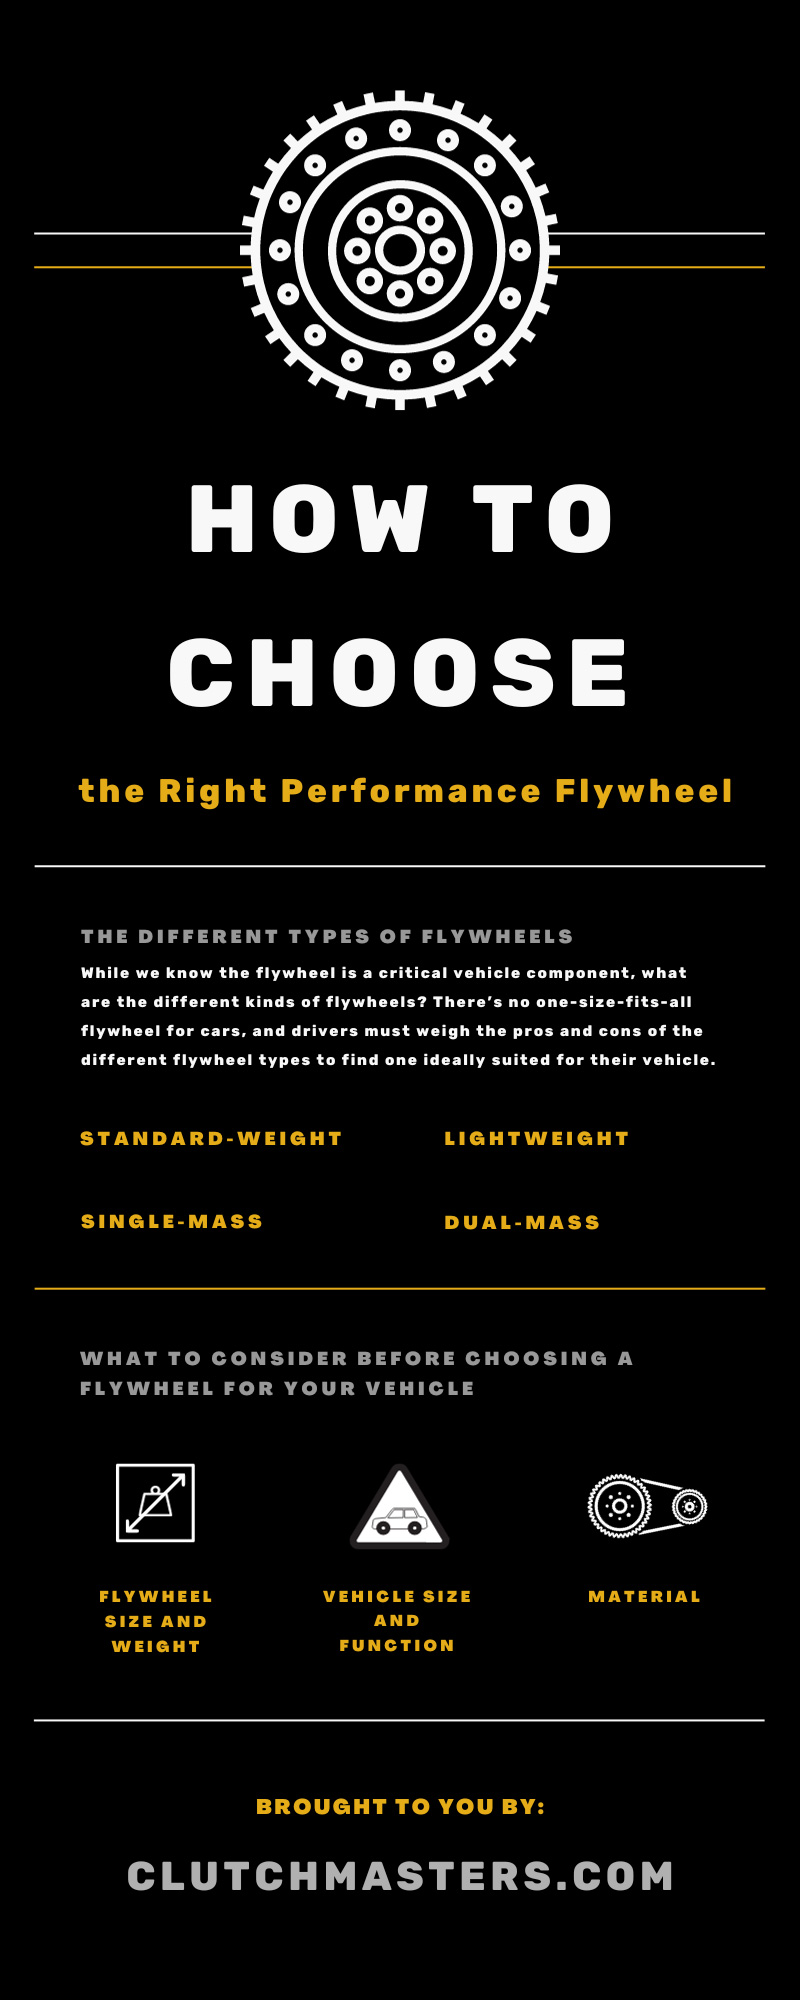 How To Choose the Right Performance Flywheel